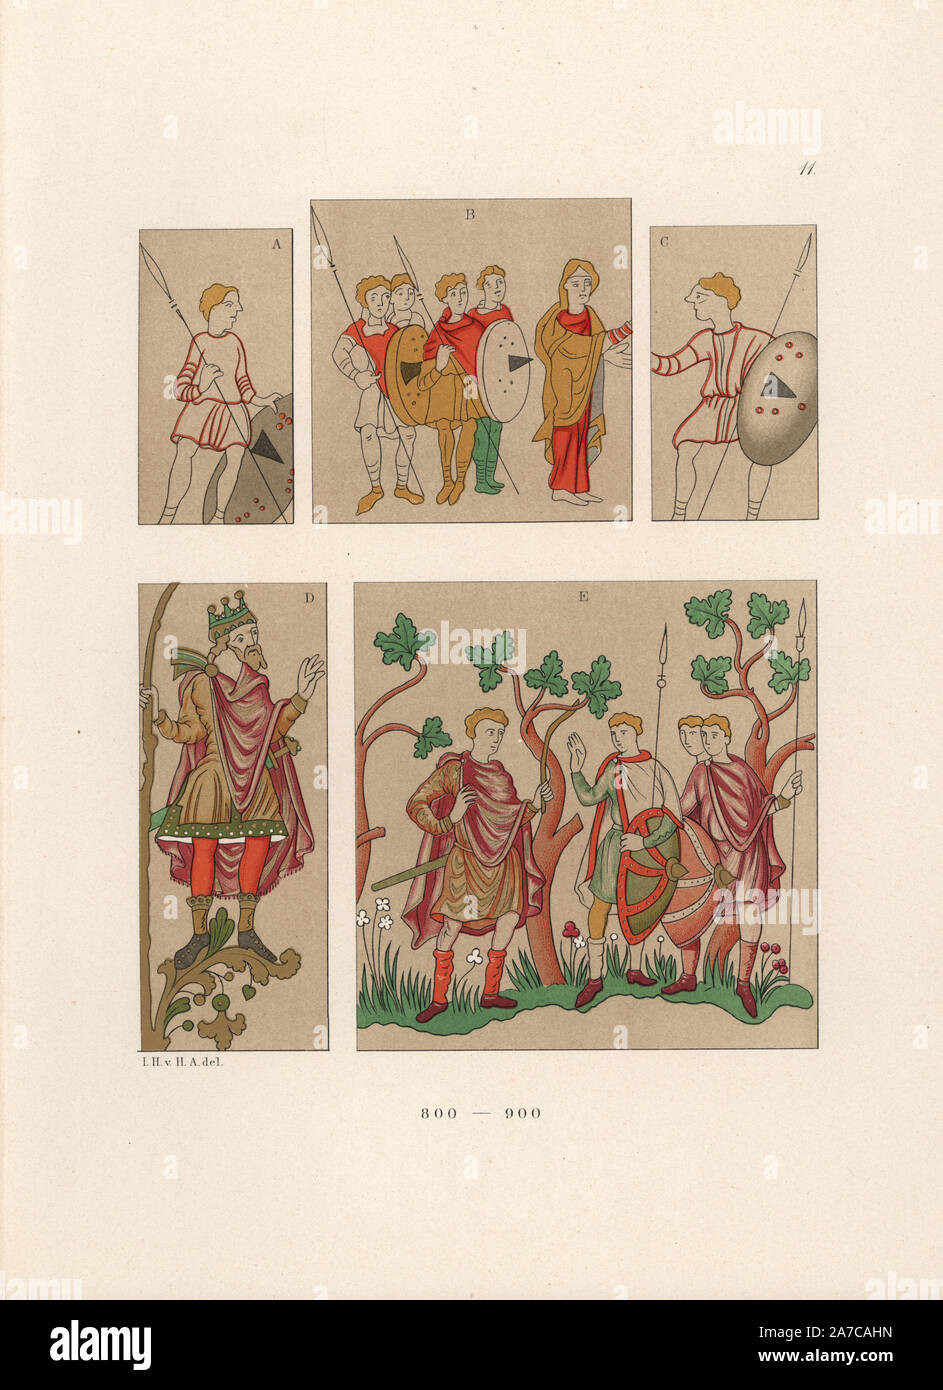 Figures from a handwritten parchment known as The Wessobrunn Prayer in Munich library (top), and figures from a painting on parchment known as the Golden Psalter of St. Gall. Chromolithograph from Hefner-Alteneck's 'Costumes, Artworks and Appliances from the Middle Ages to the 17th Century,' Frankfurt, 1879. Illustration by Dr. Jakob Heinrich von Hefner-Alteneck, lithographed by Joh. Klipphahn, and published by Heinrich Keller. Dr. Hefner-Alteneck (1811 - 1903) was a German museum curator, archaeologist, art historian, illustrator and etcher. Stock Photo